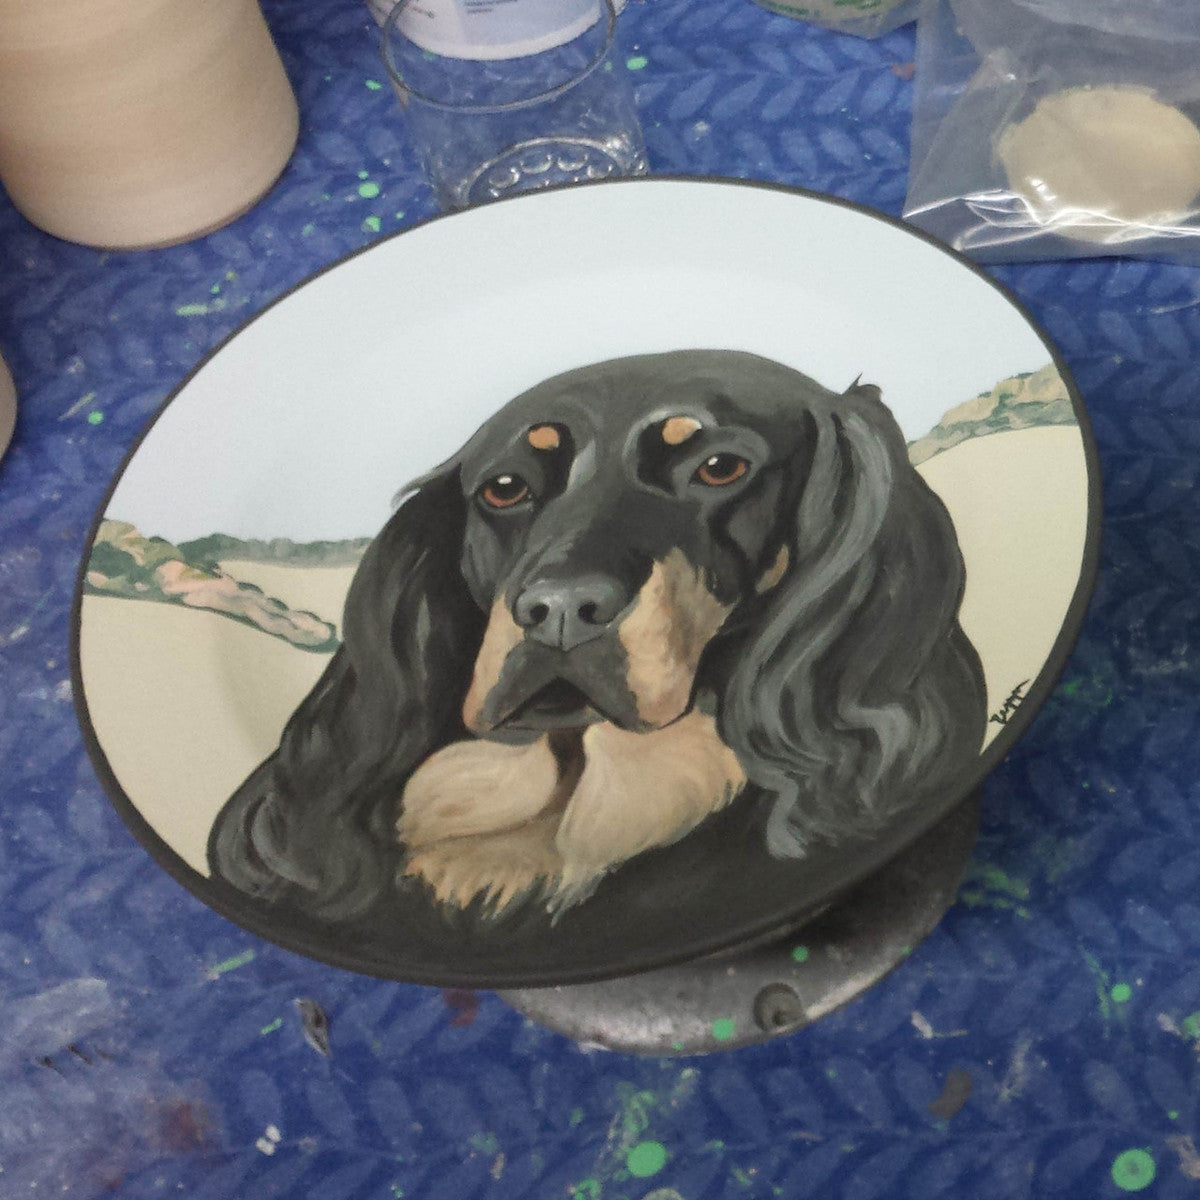 Gallery Style Hand Painted 11 inch Plate in Progress